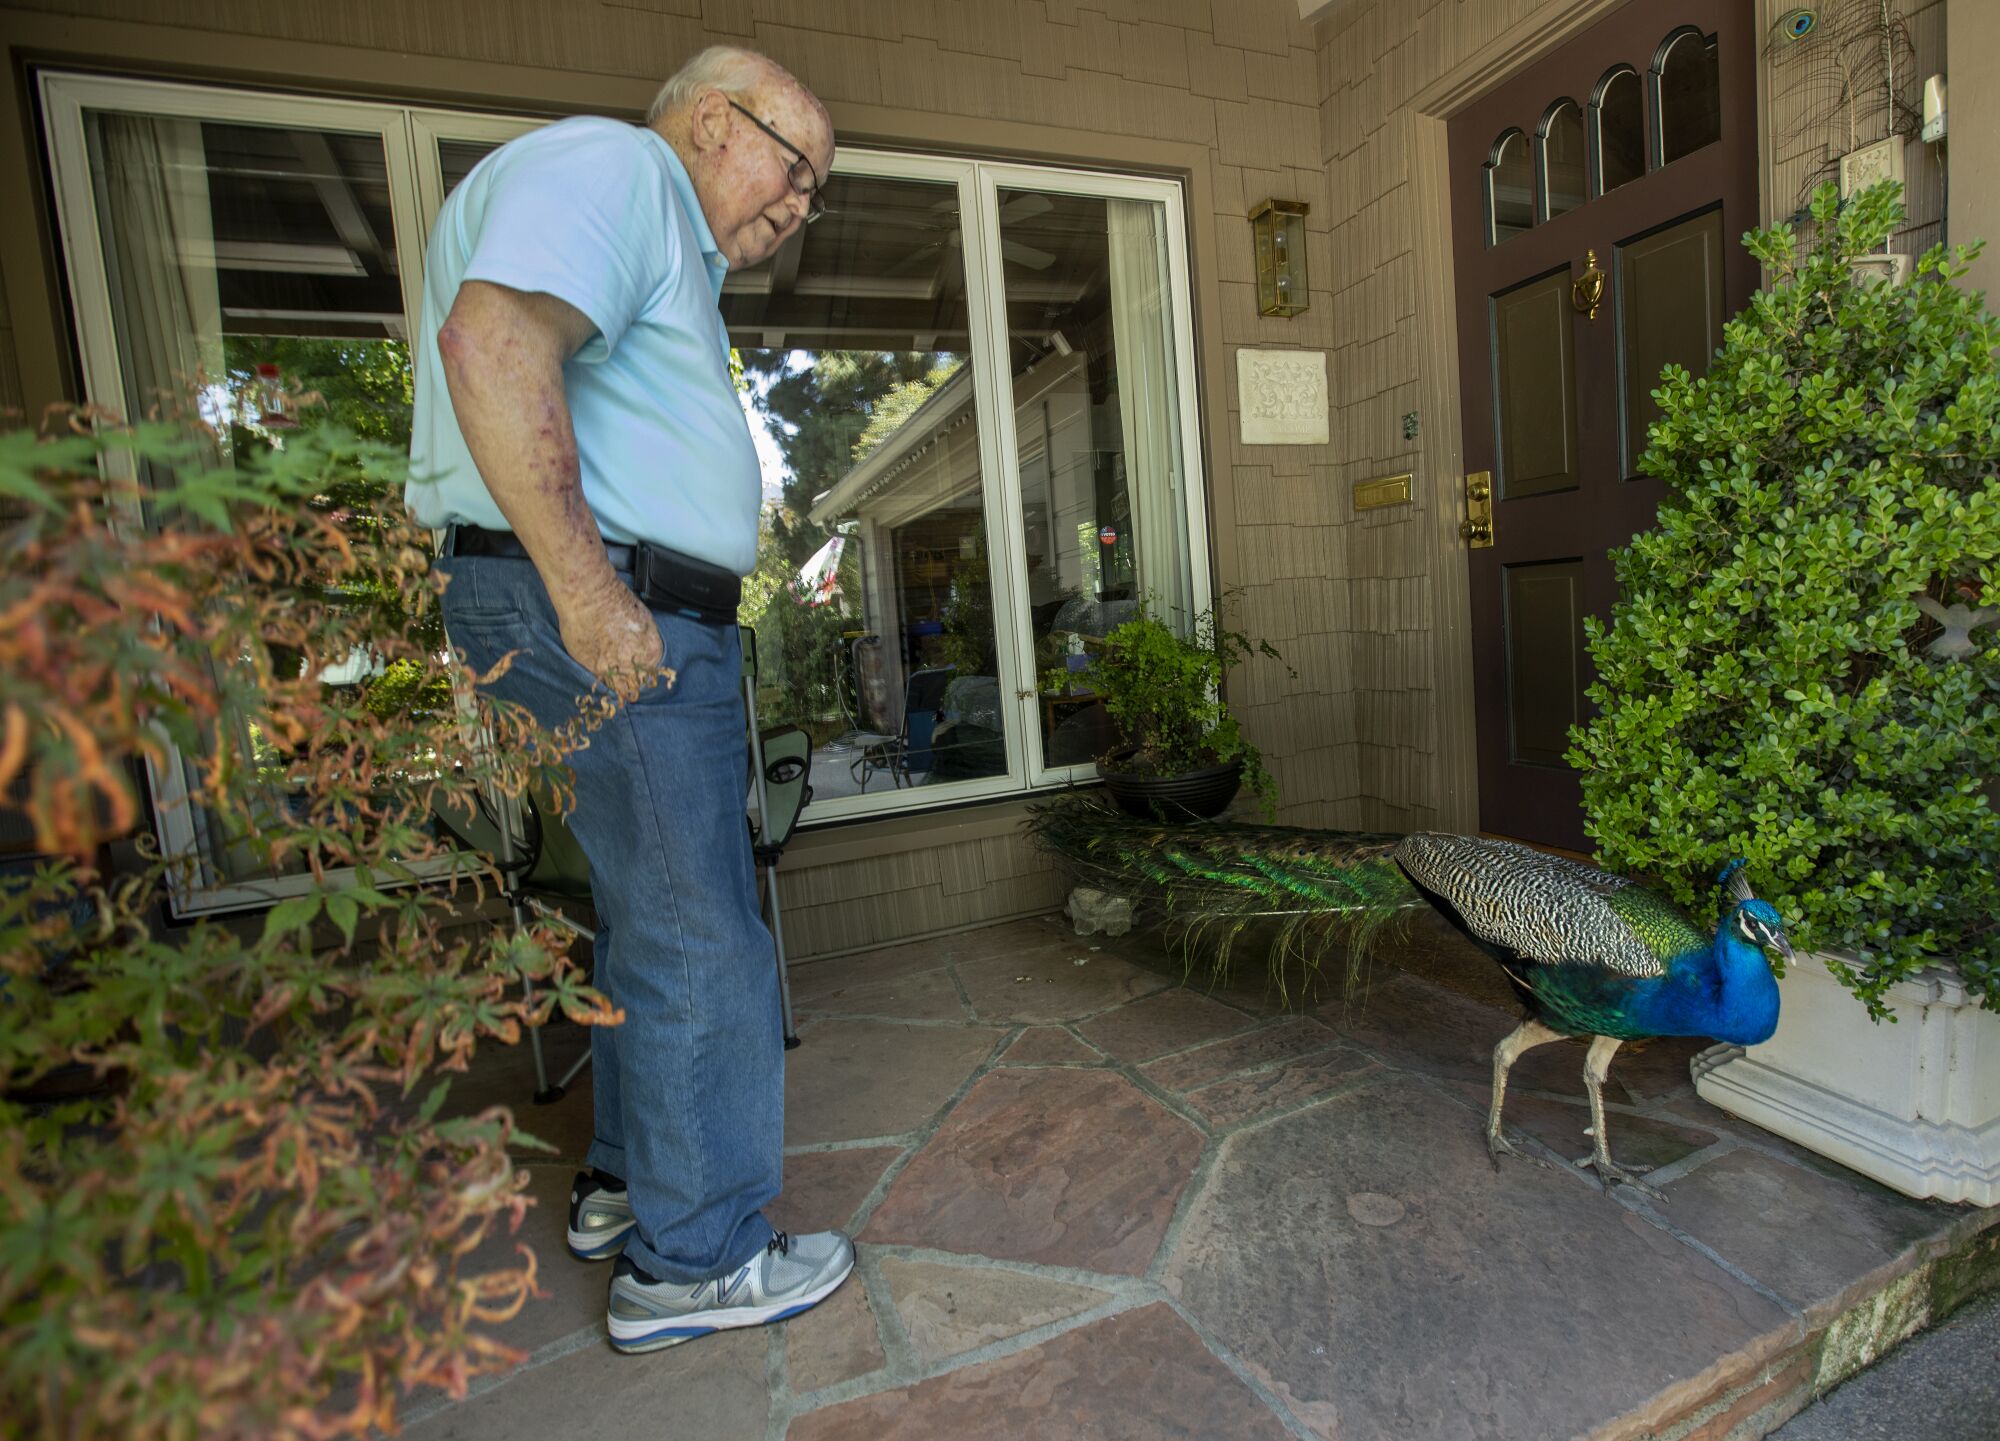 A man smiles at a peacock strutting on his stone porch in front of his tan home